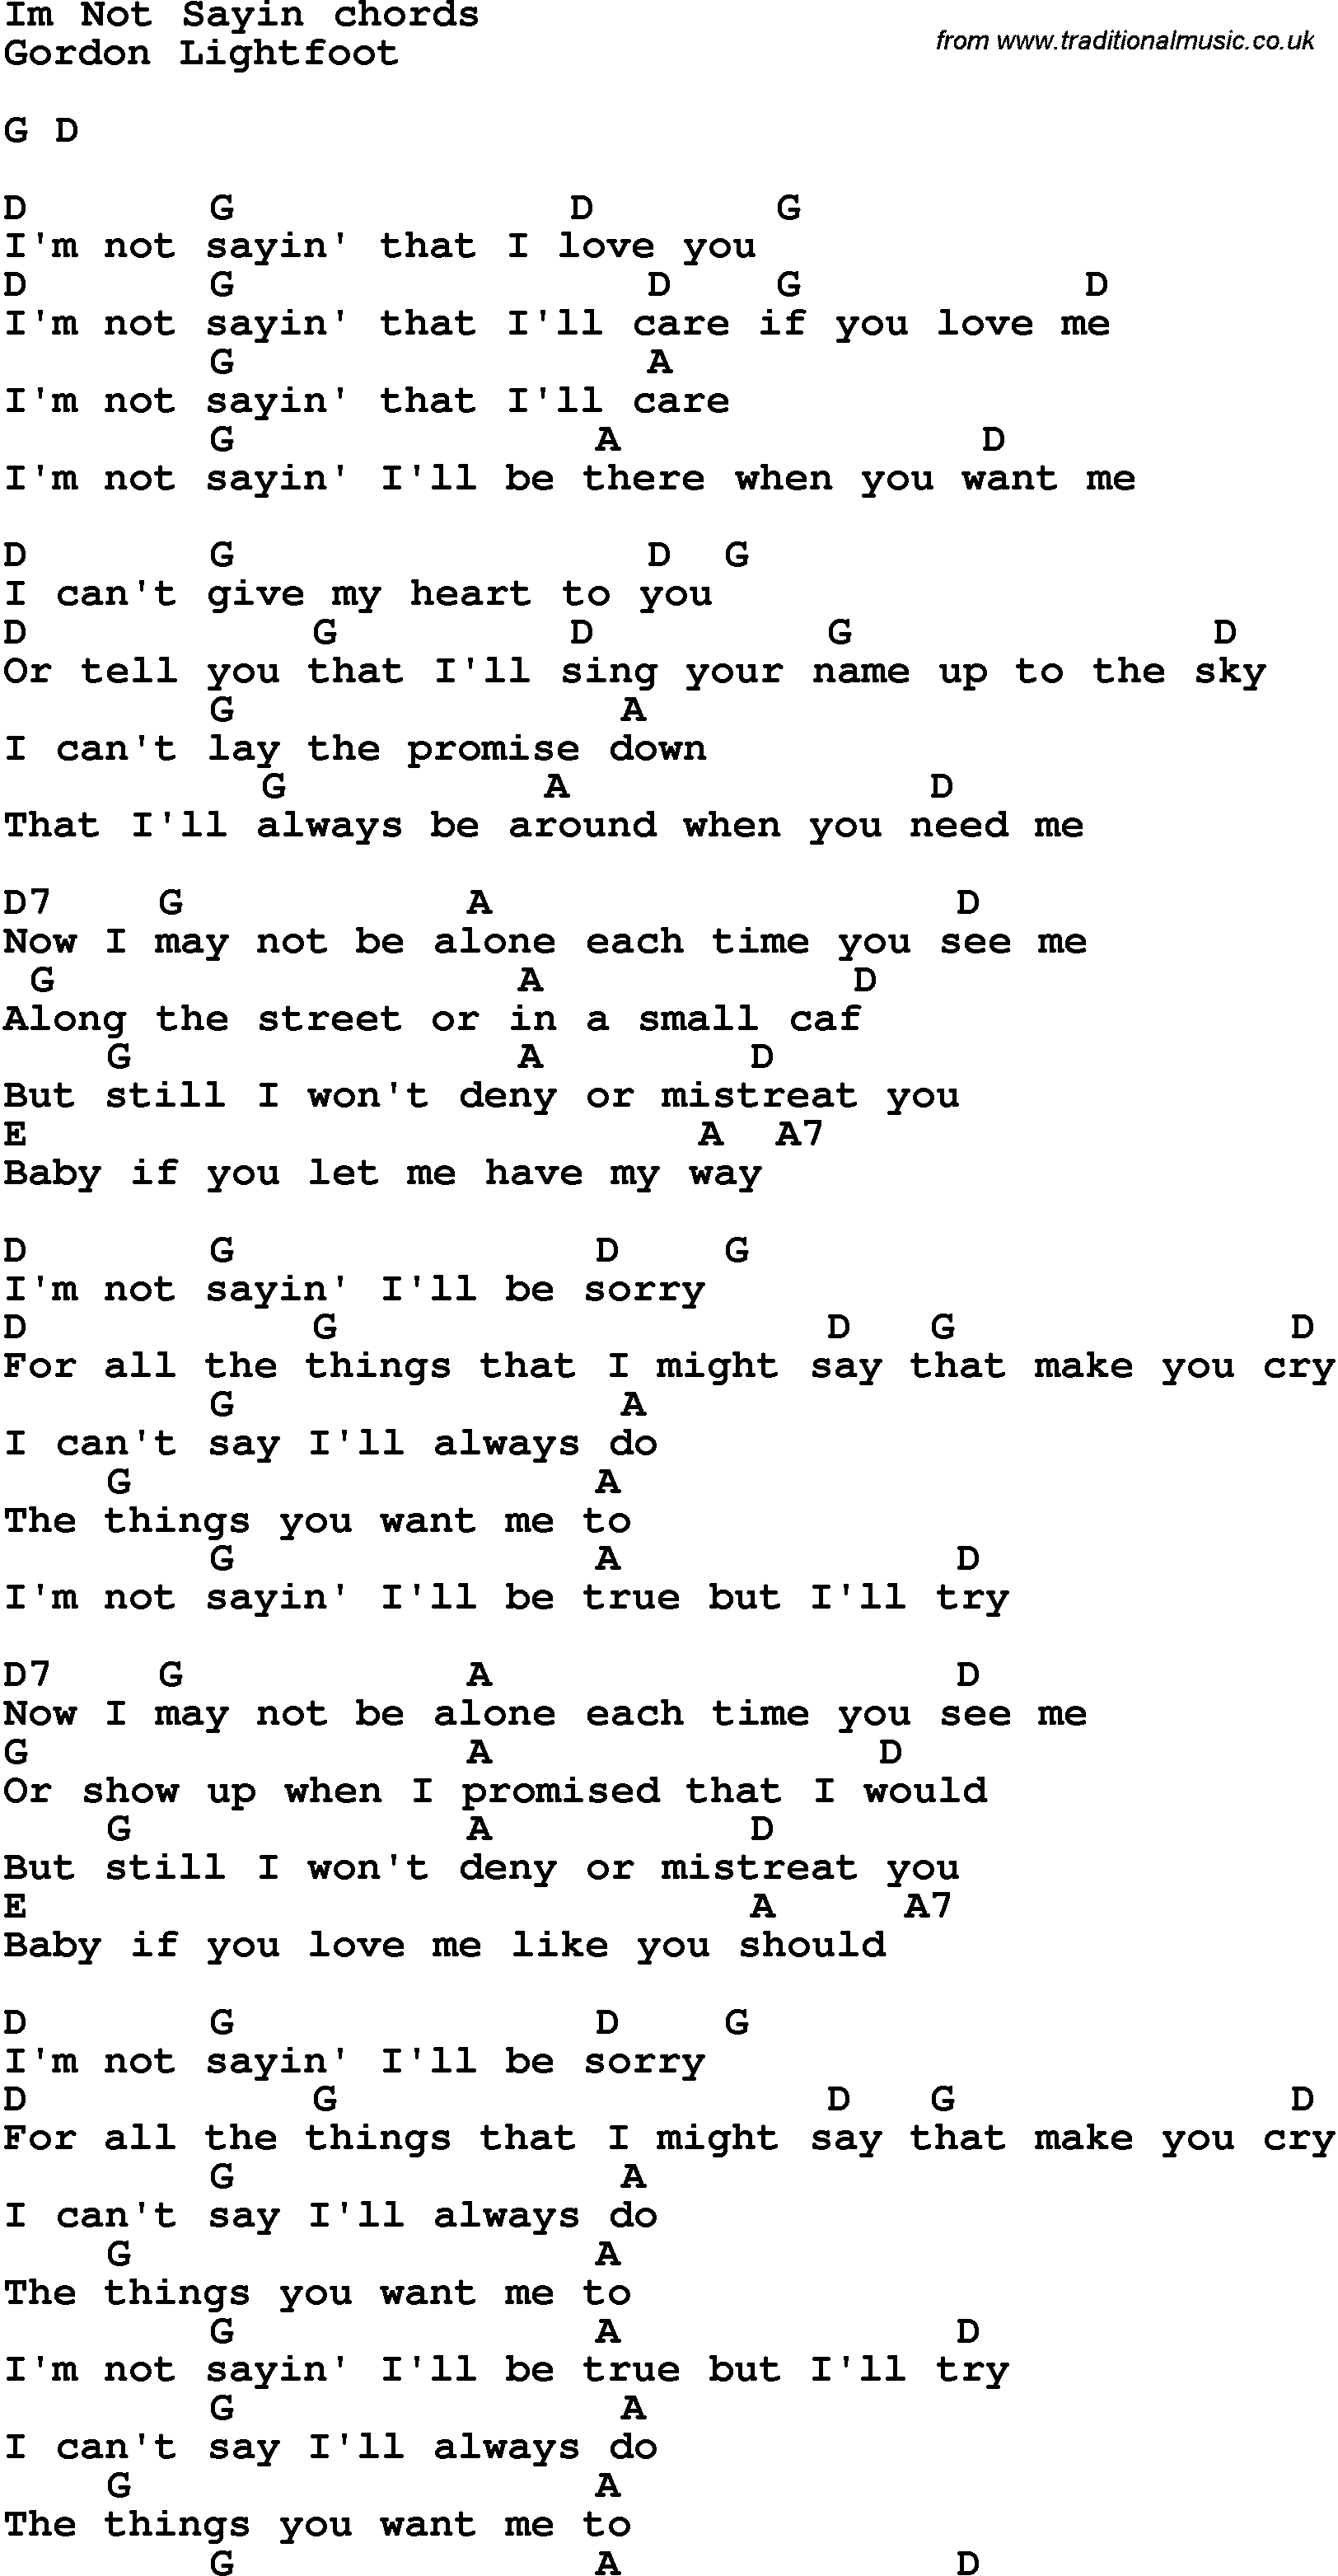 Song Lyrics with guitar chords for I'm Not Sayin'